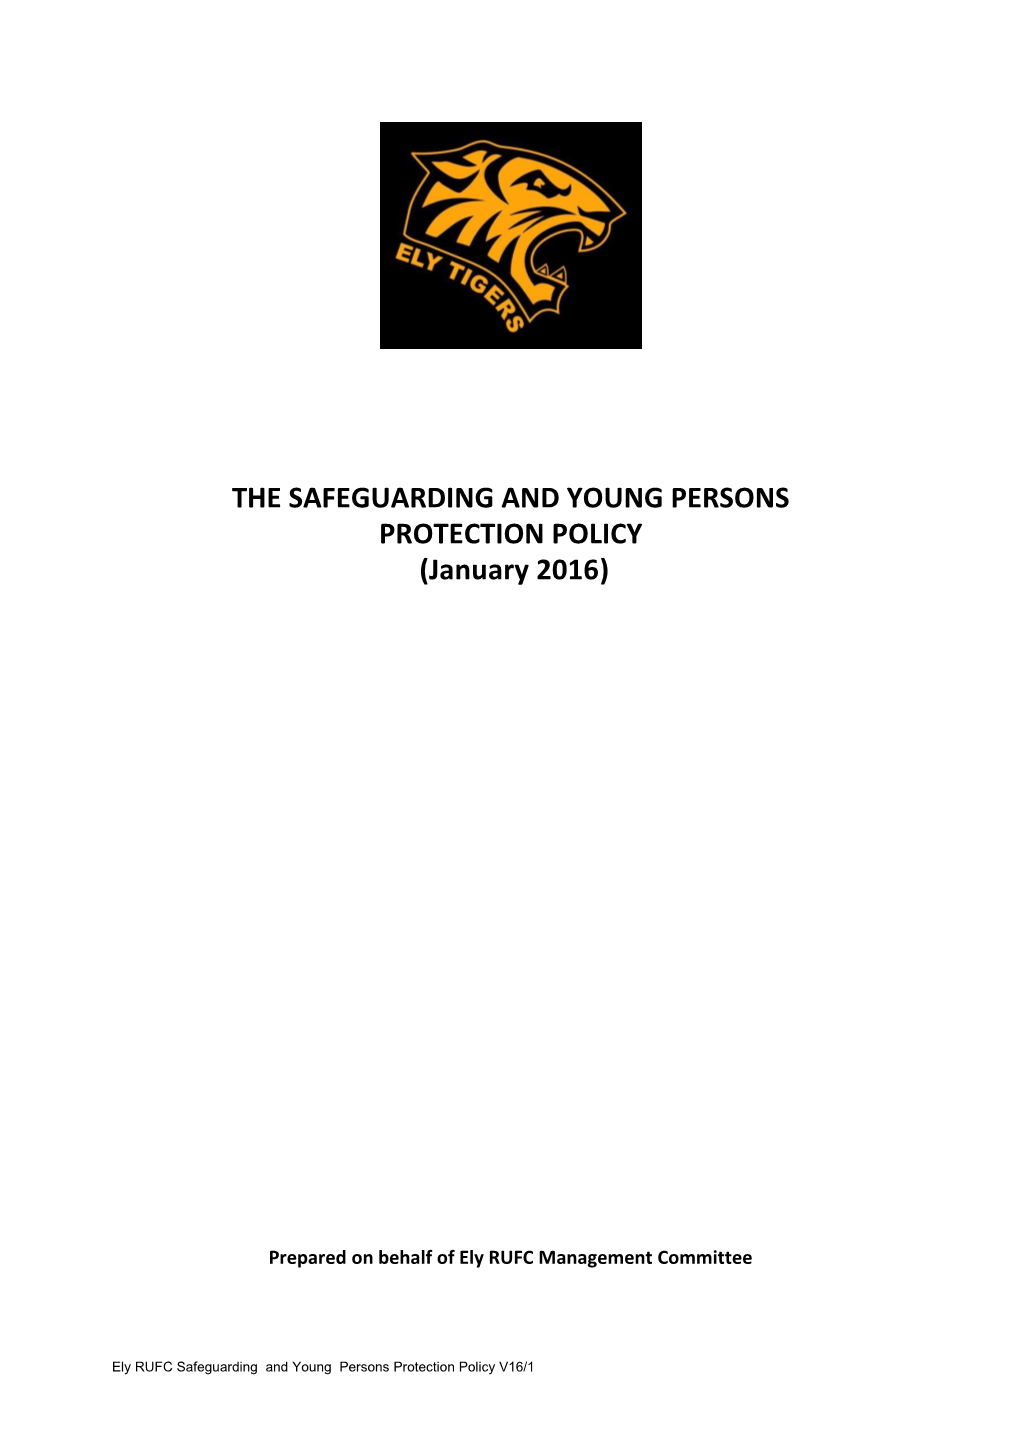 The Safeguardingand Youngpersonsprotection Policy